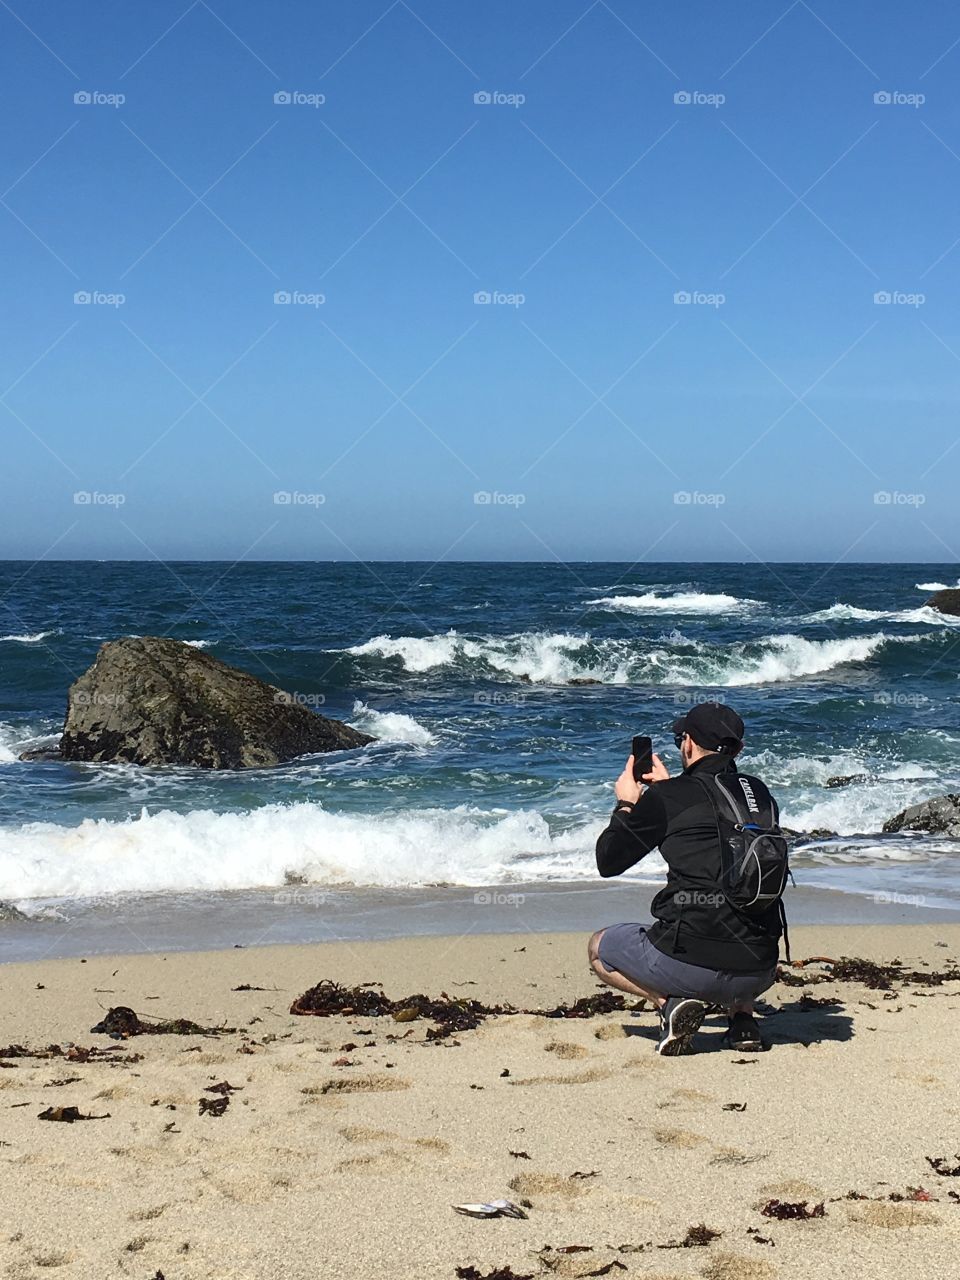 Male hiker kneeling down on a beach taking a photo of the ocean waves.